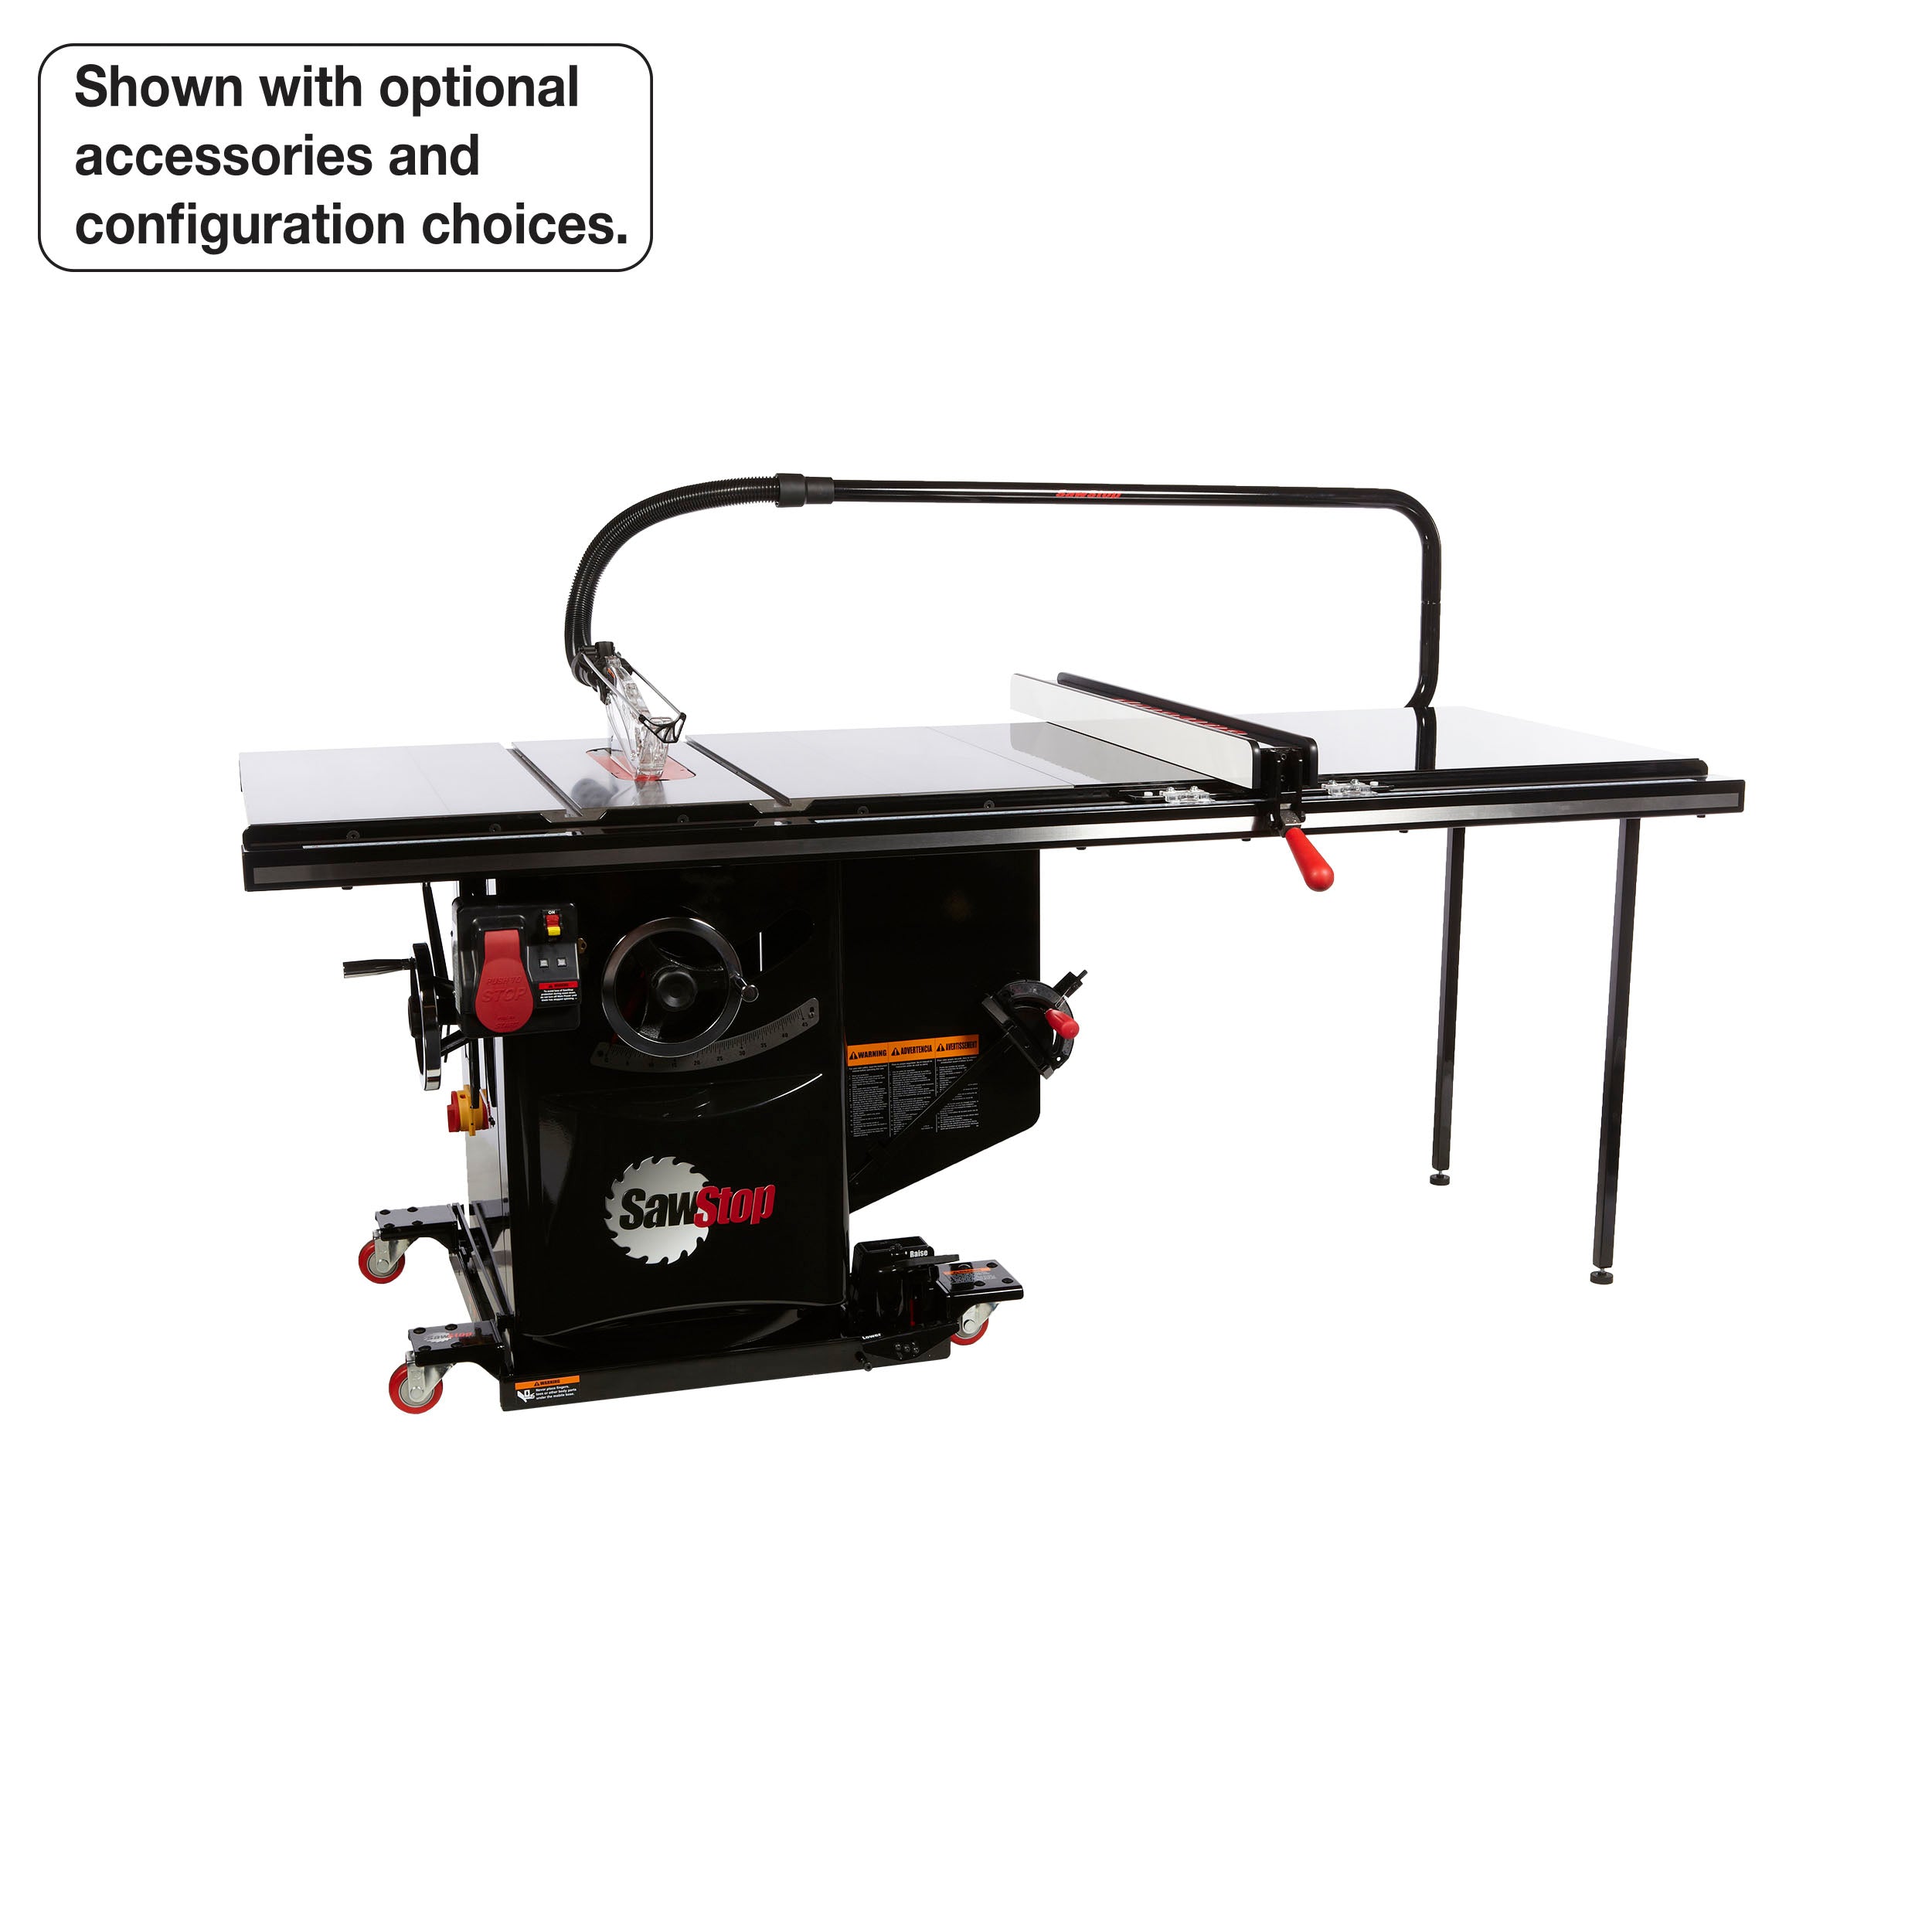 SawStop 5HP, 1ph, 230v Industrial Cabinet Saw w/ 52